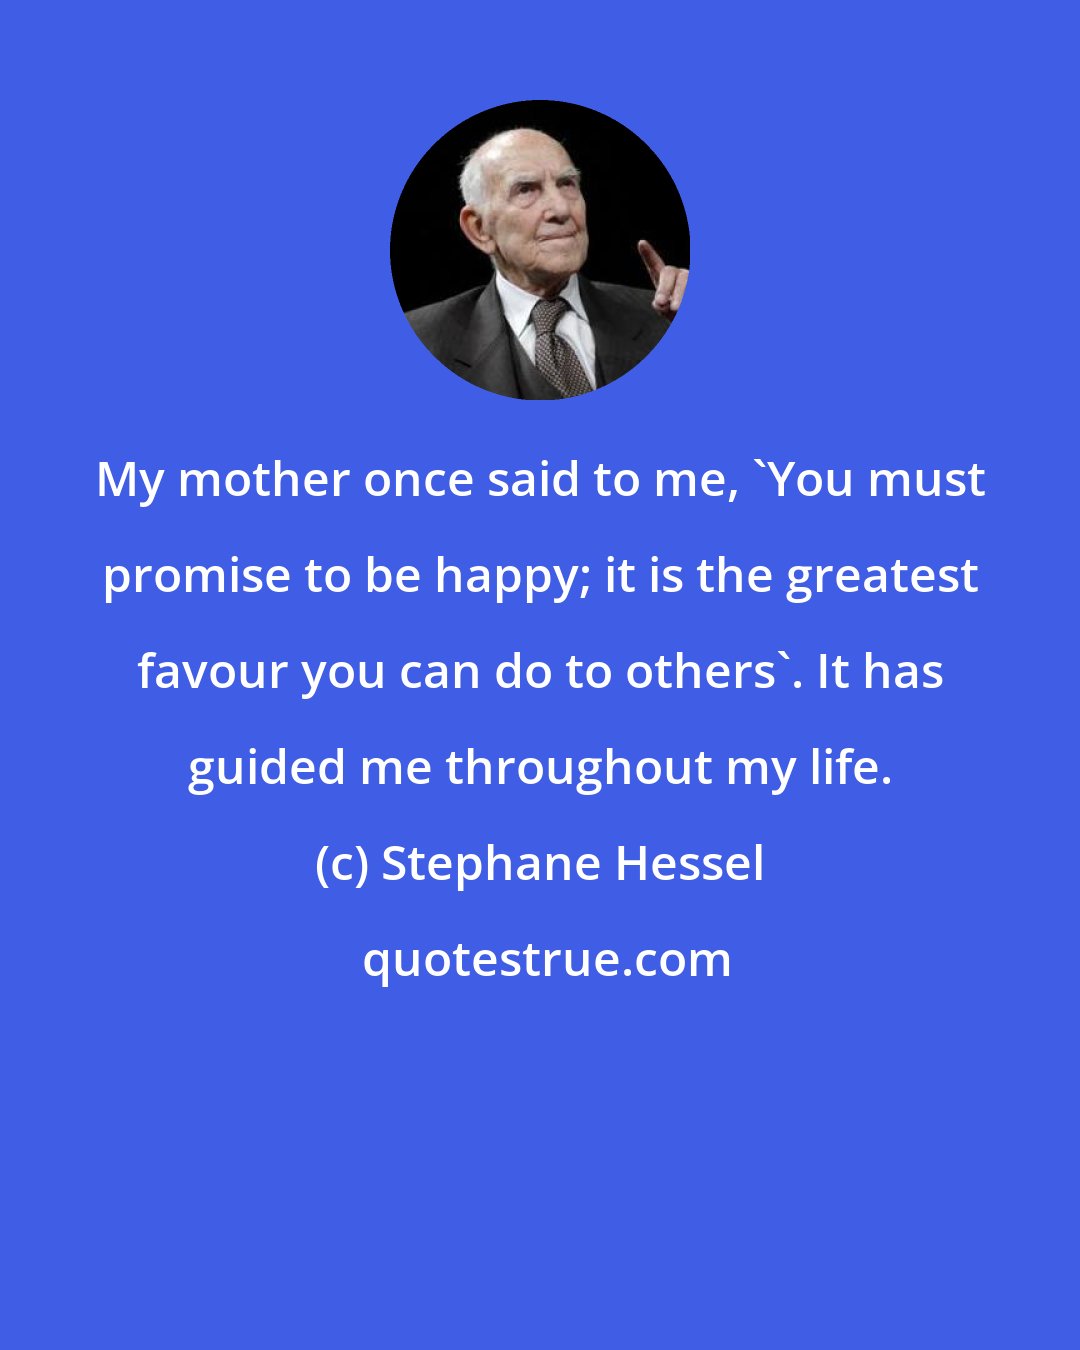 Stephane Hessel: My mother once said to me, 'You must promise to be happy; it is the greatest favour you can do to others'. It has guided me throughout my life.